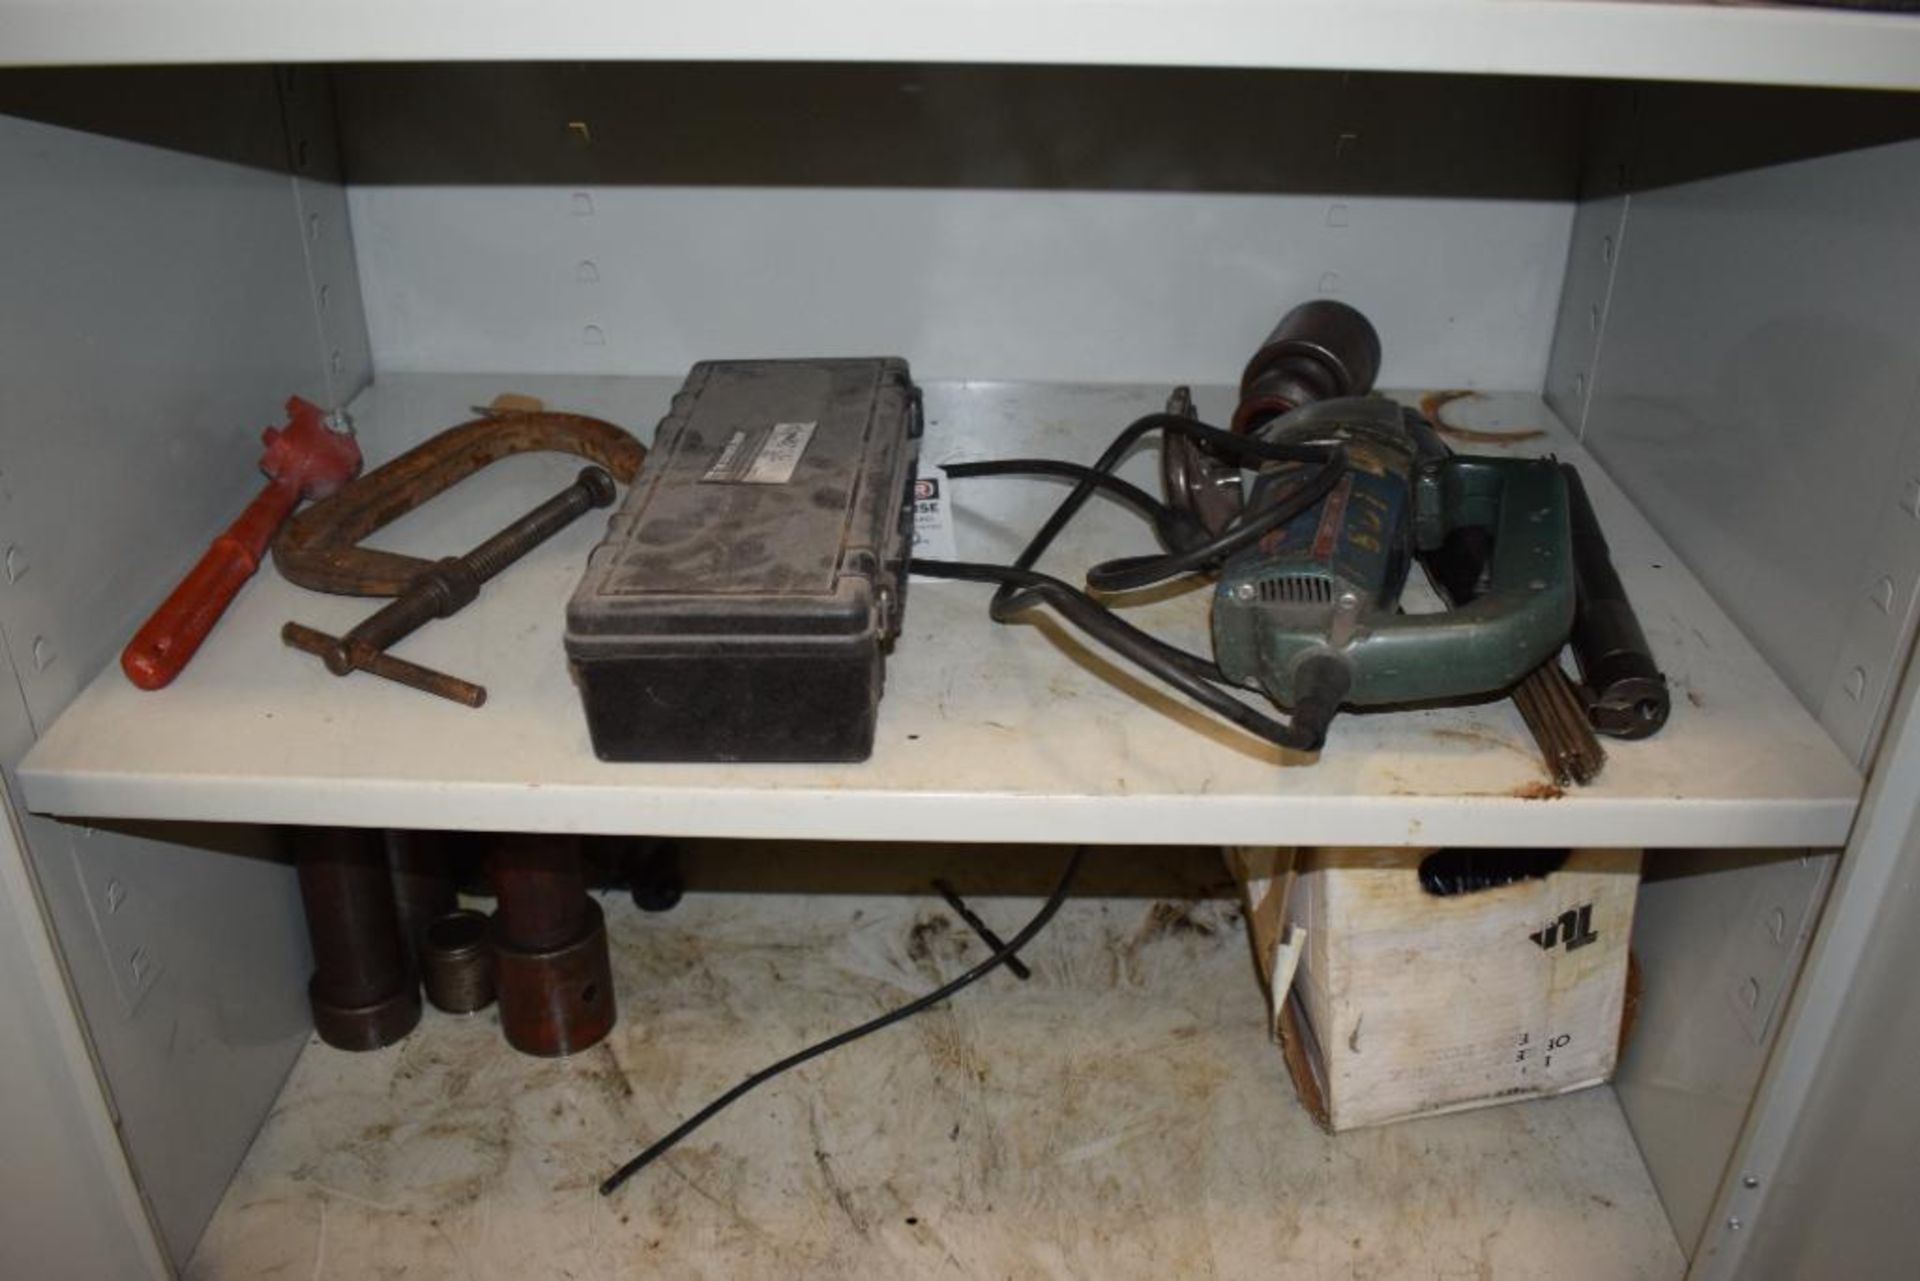 Lot Consisting Of: (1) 2 Door metal cabinets with miscellaneous tools, including saw, batteries, met - Image 6 of 10